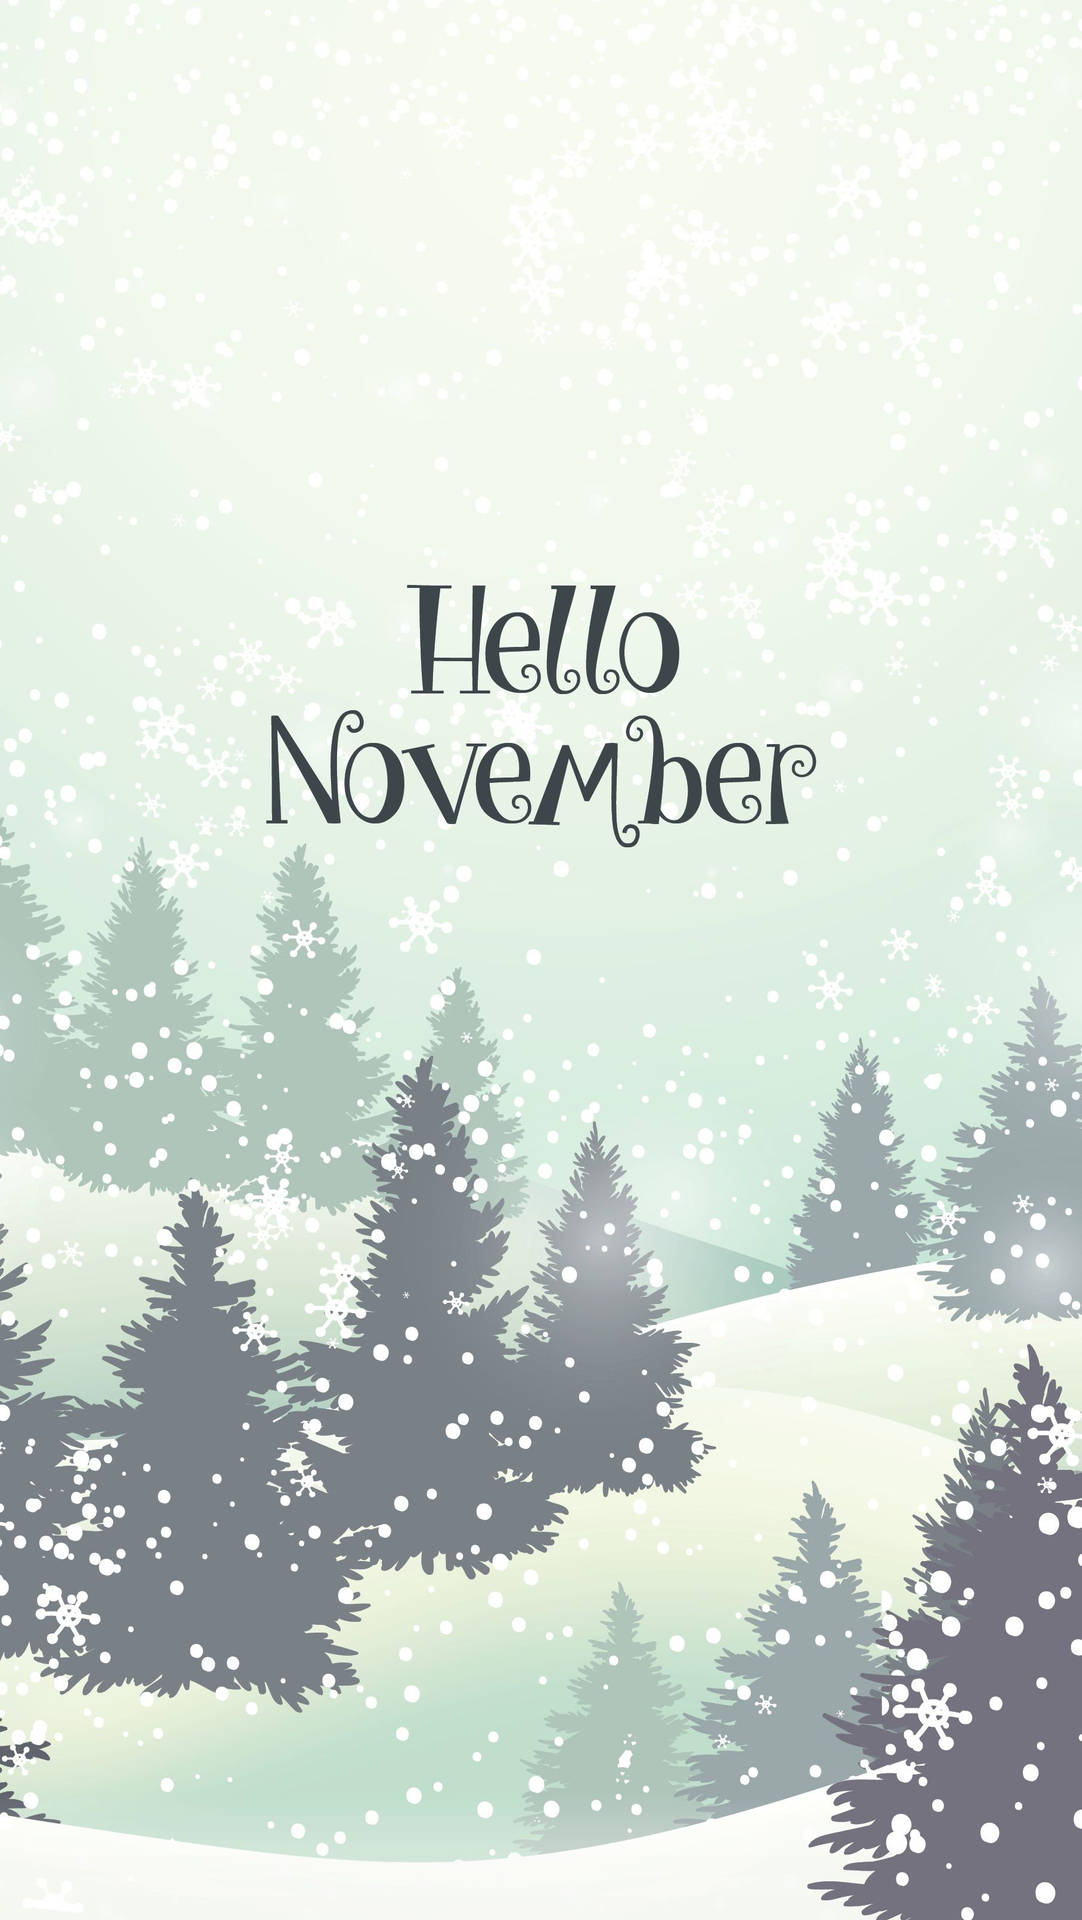 Upgrade your device with this chic November iPhone wallpaper Wallpaper